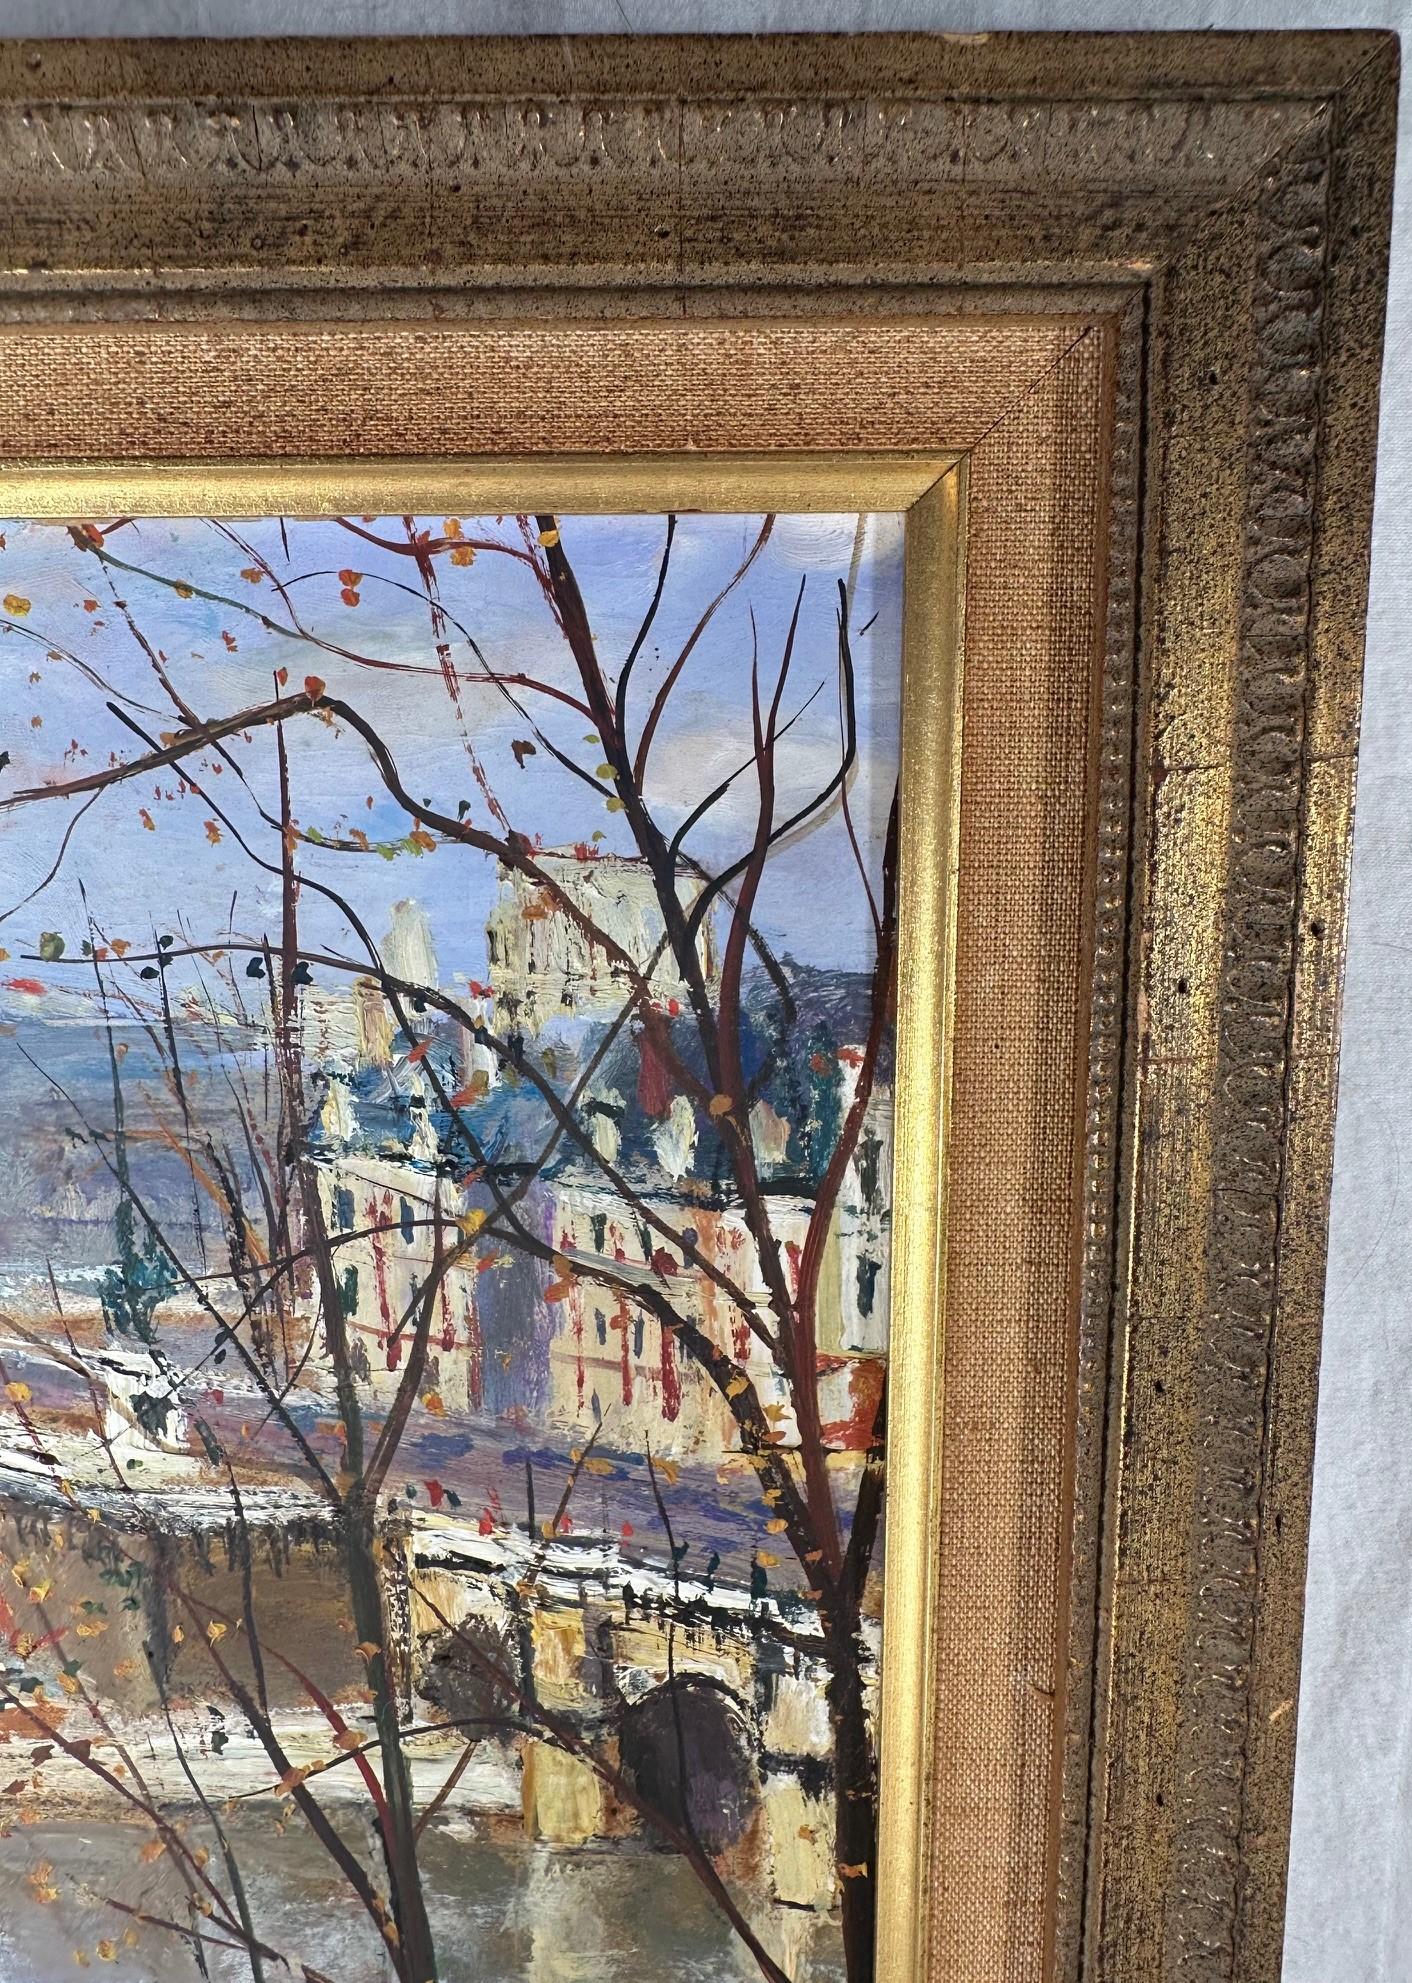 Original Serge Belloni Parisian Cityscape Painting. Signed Framed Seine in Autumn.
Charming Parisian view of the Seine in Autumn, cityscape, signed and framed oil on artist board by Serge Belloni. The painting displays essential features of